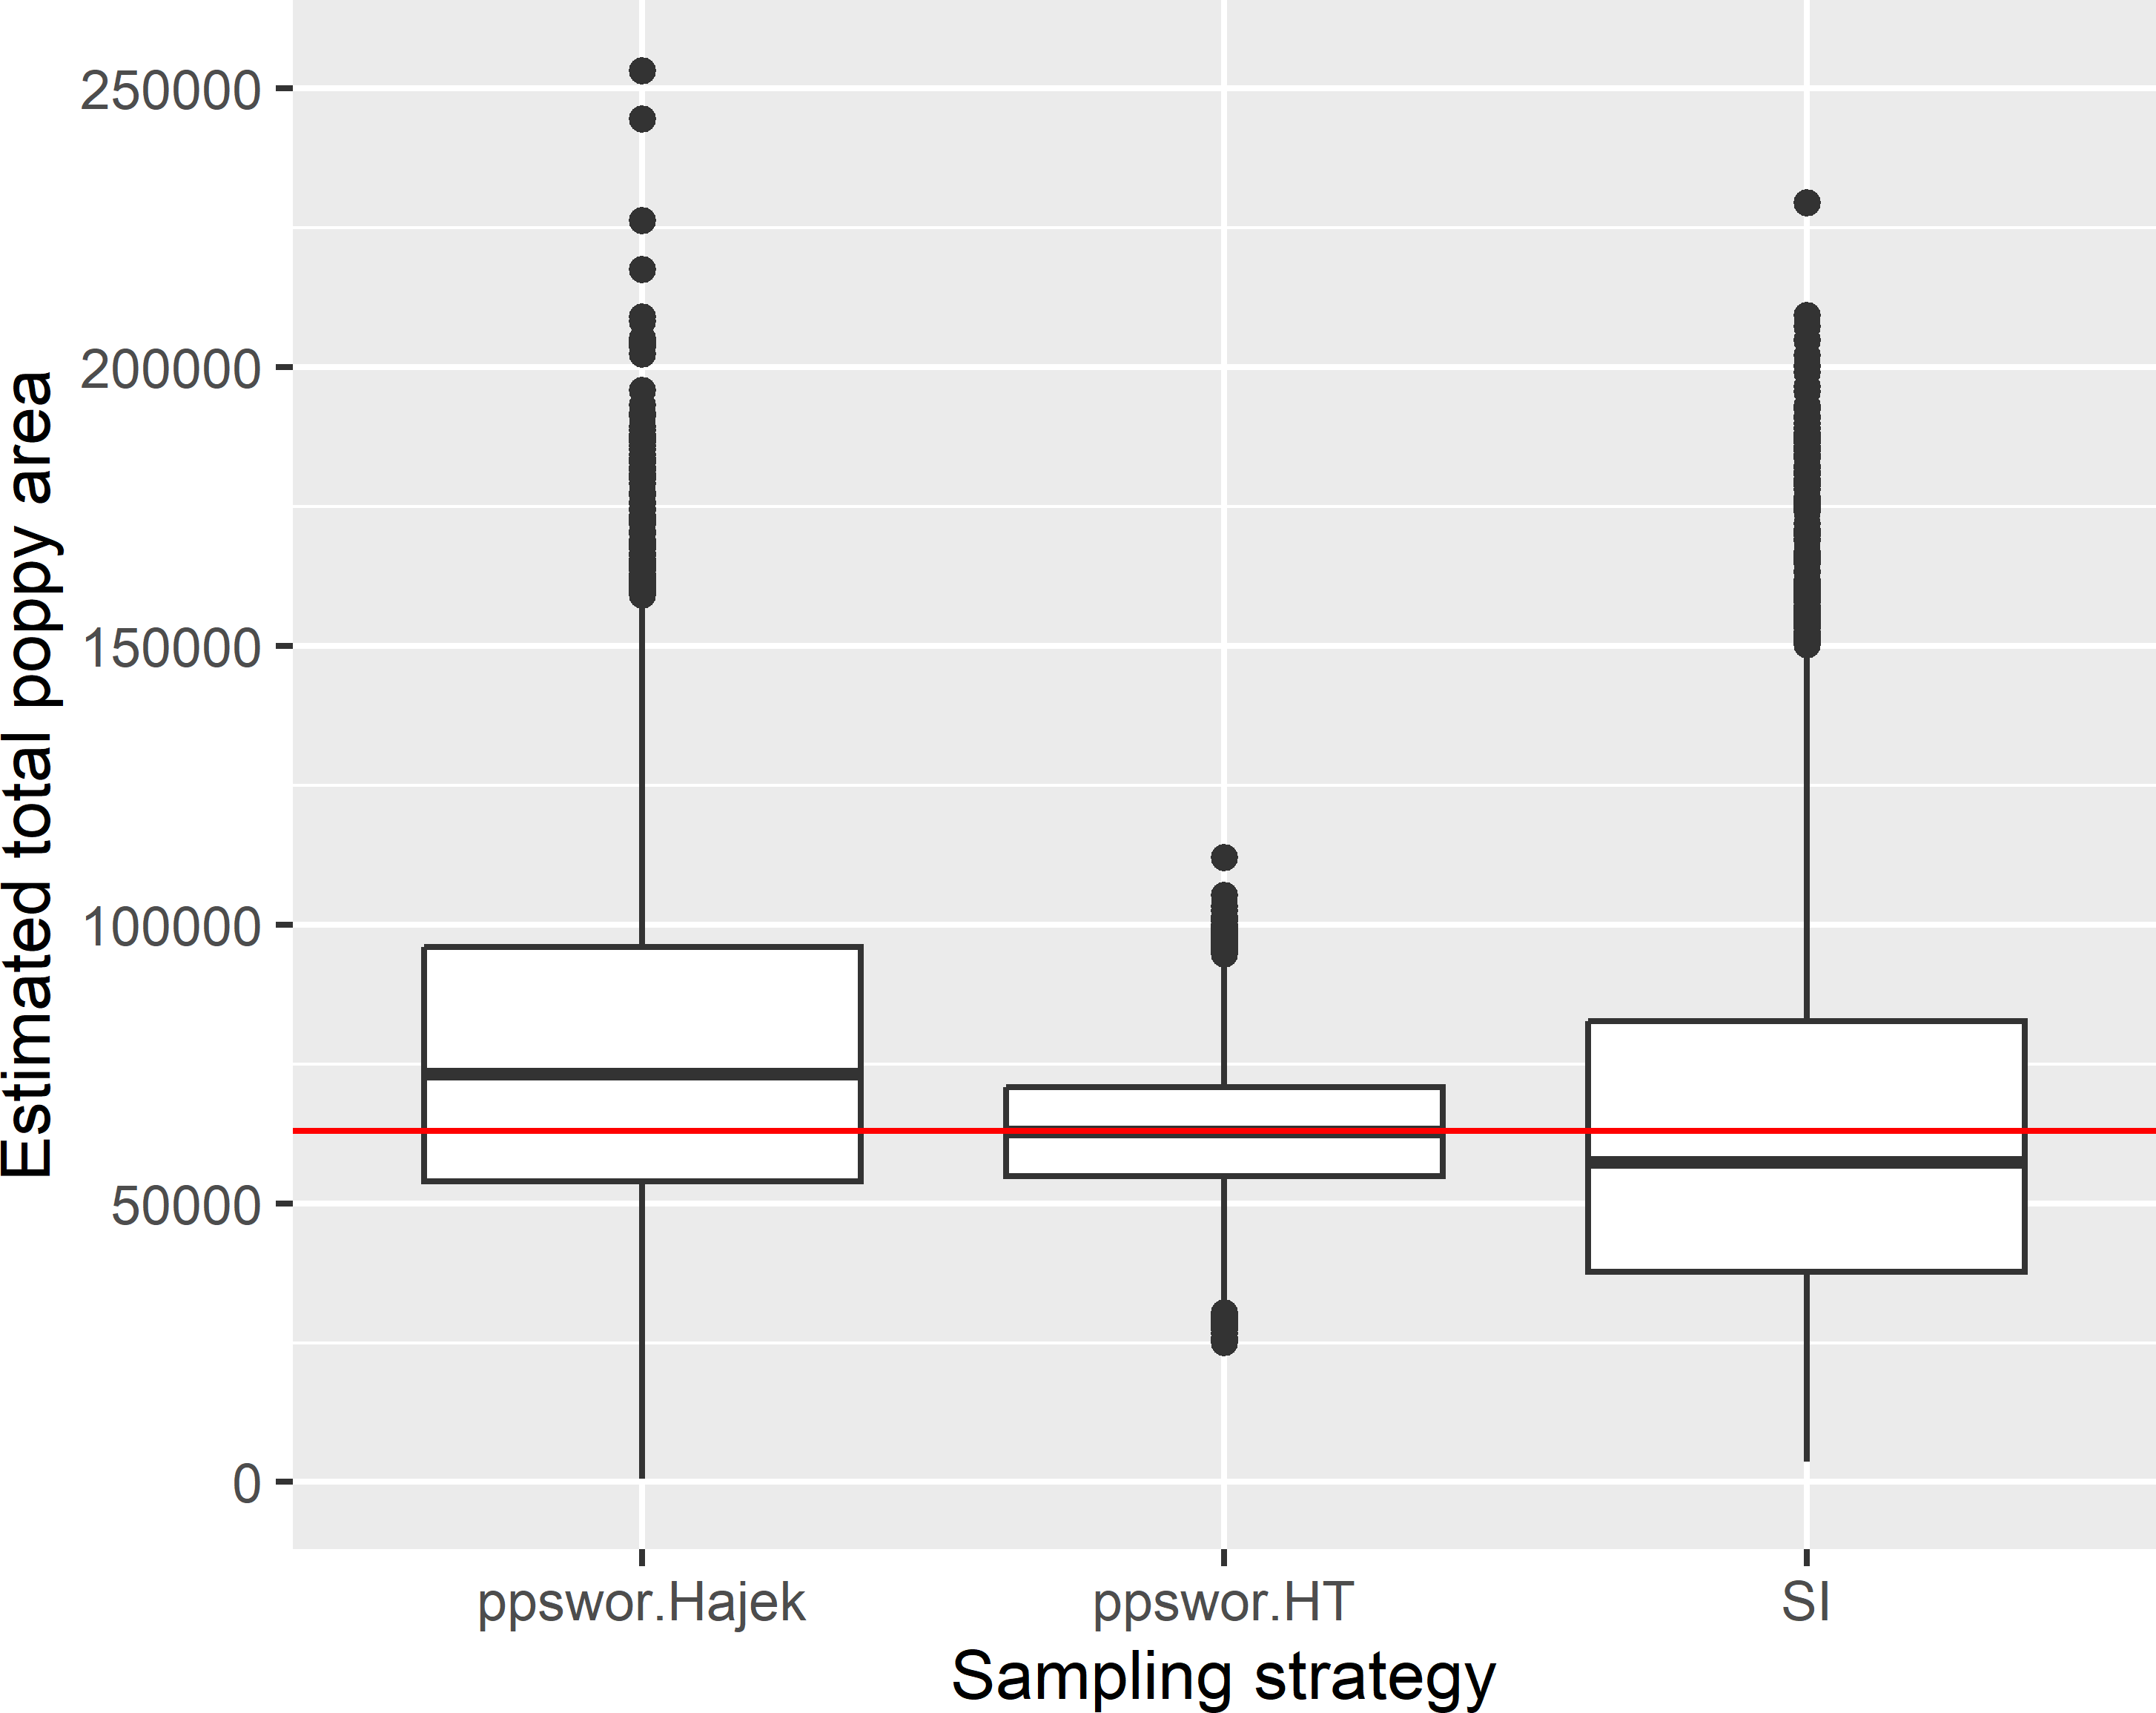 Approximated sampling distribution of the \(\pi\) estimator (ppswor.HT) and the Hájek estimator (ppswor.Hajek) of the total poppy area (ha) in Kandahar with ppswor sampling of size 40, and of the \(\pi\) estimator with simple random sampling without replacement (SI) of size 40.